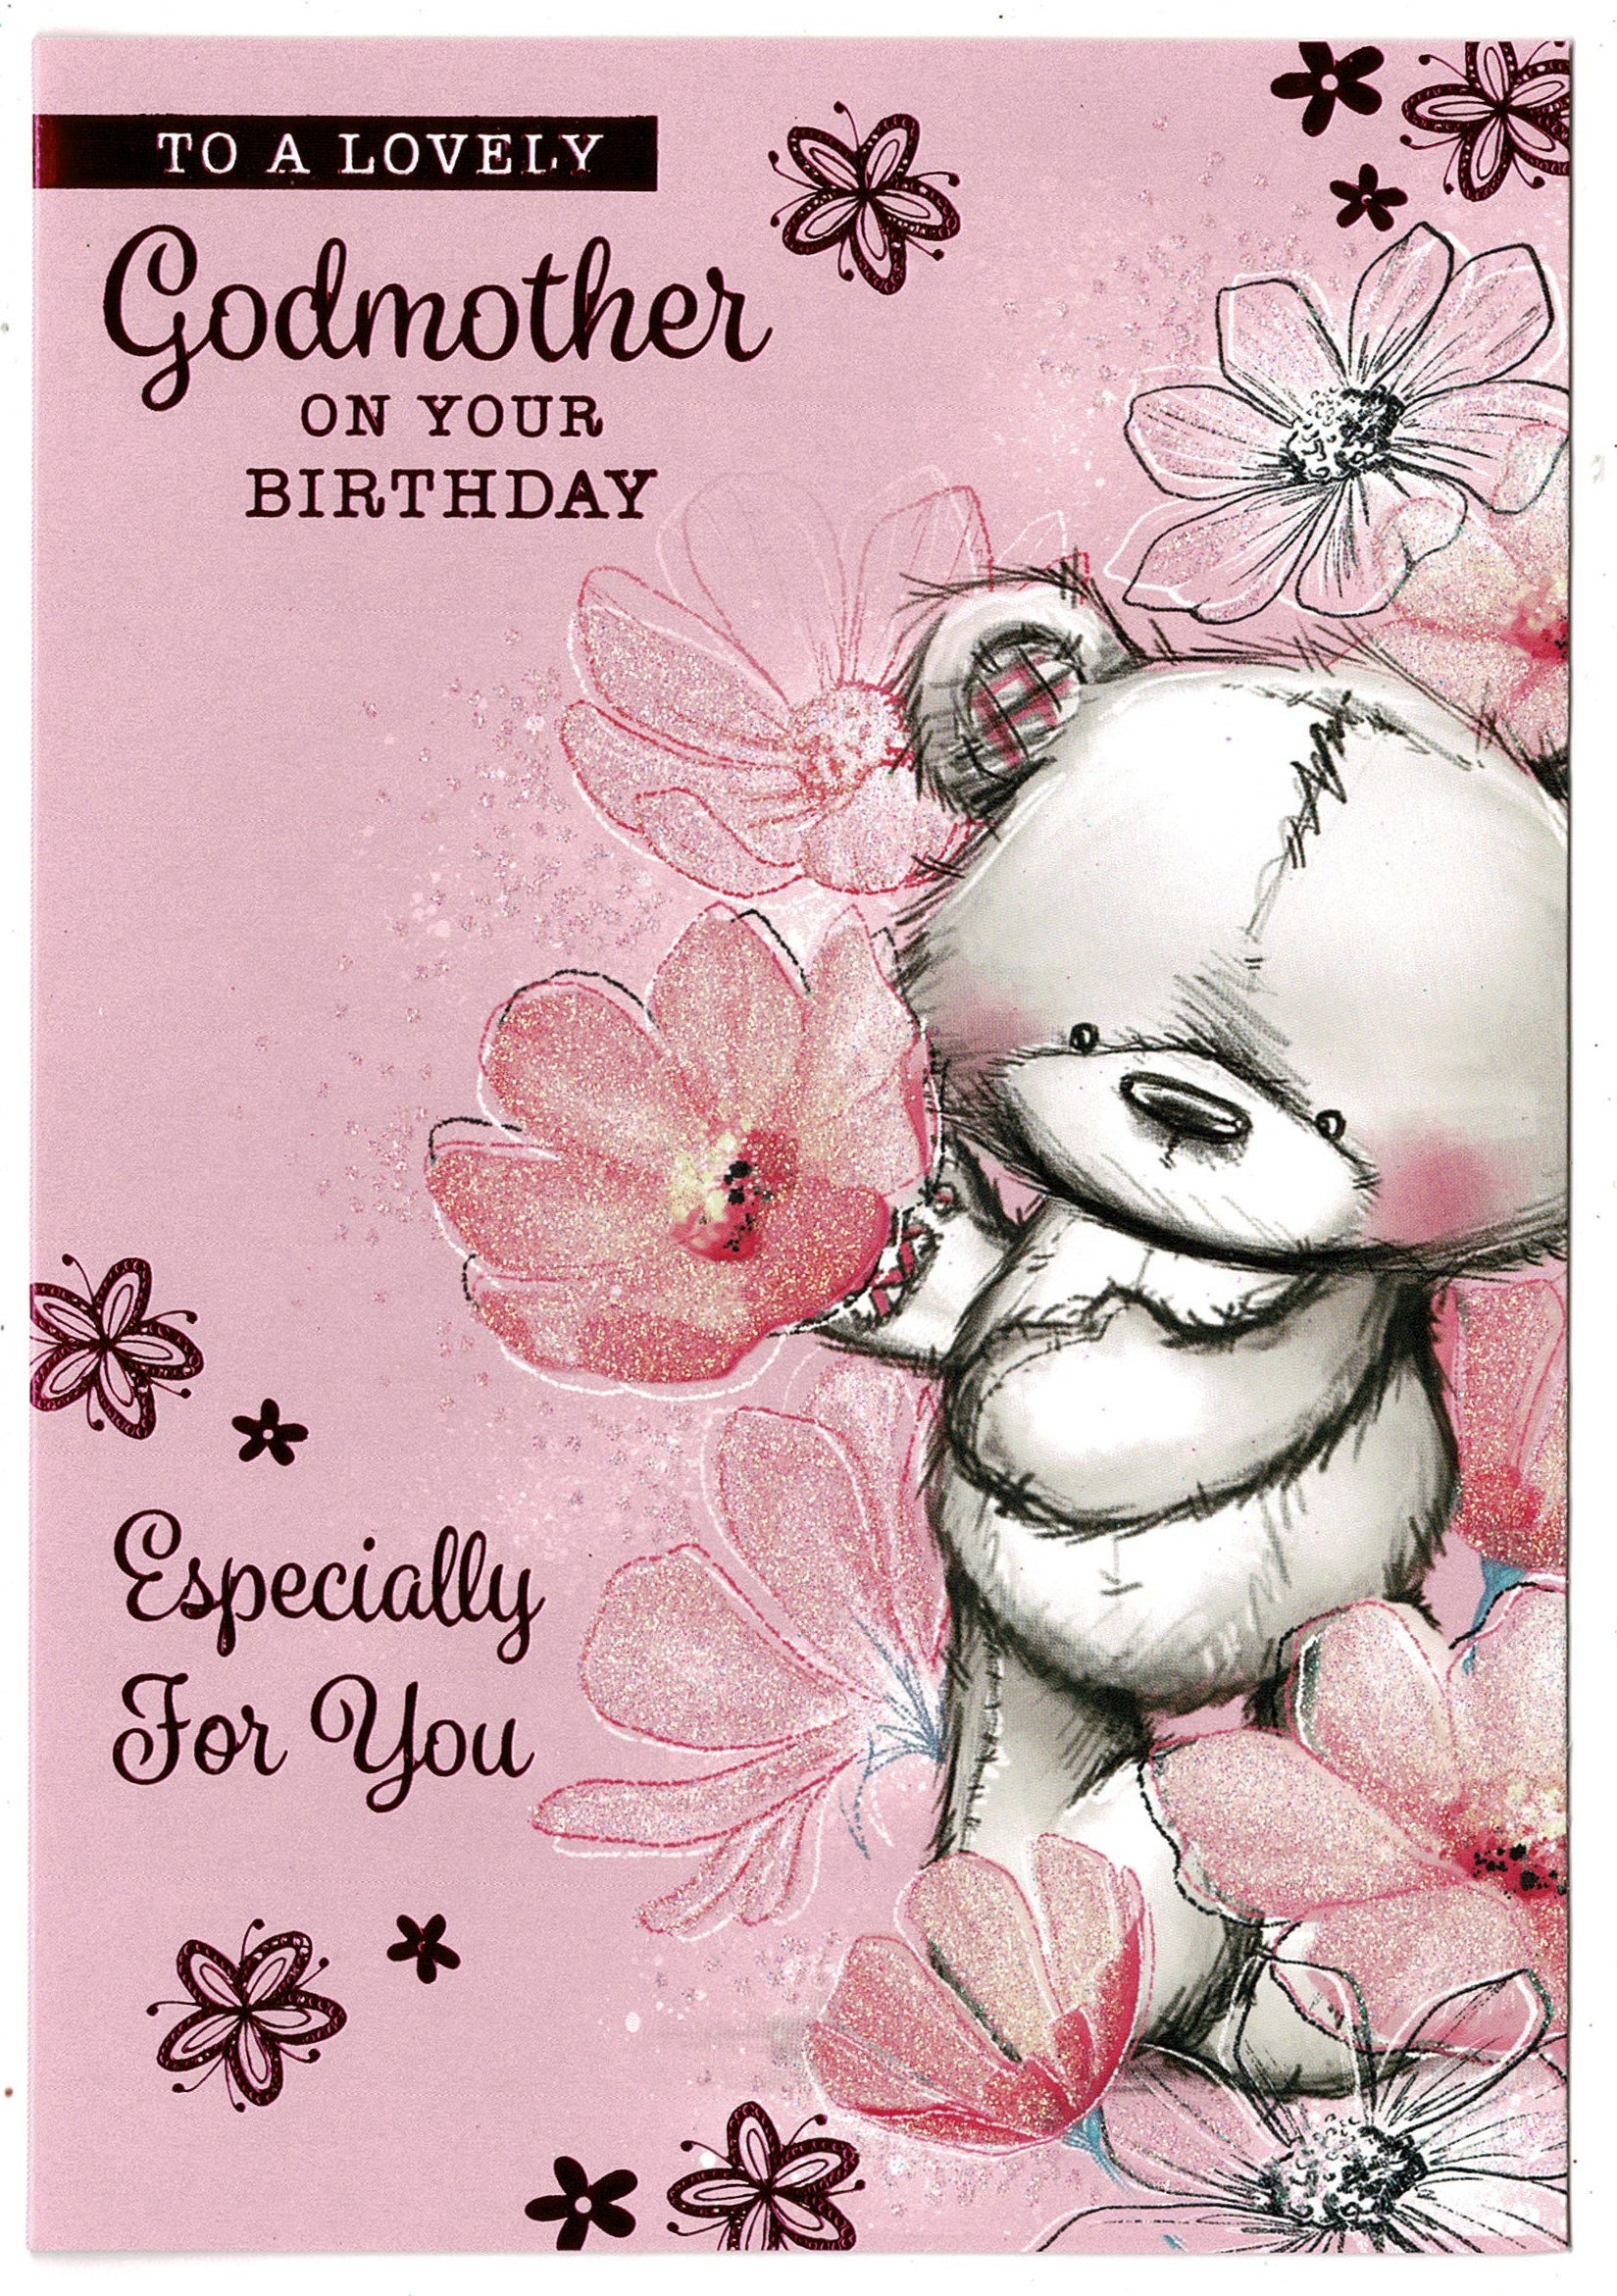 Godmother Cat Design Happy Birthday Quality Card Lovely Verse 